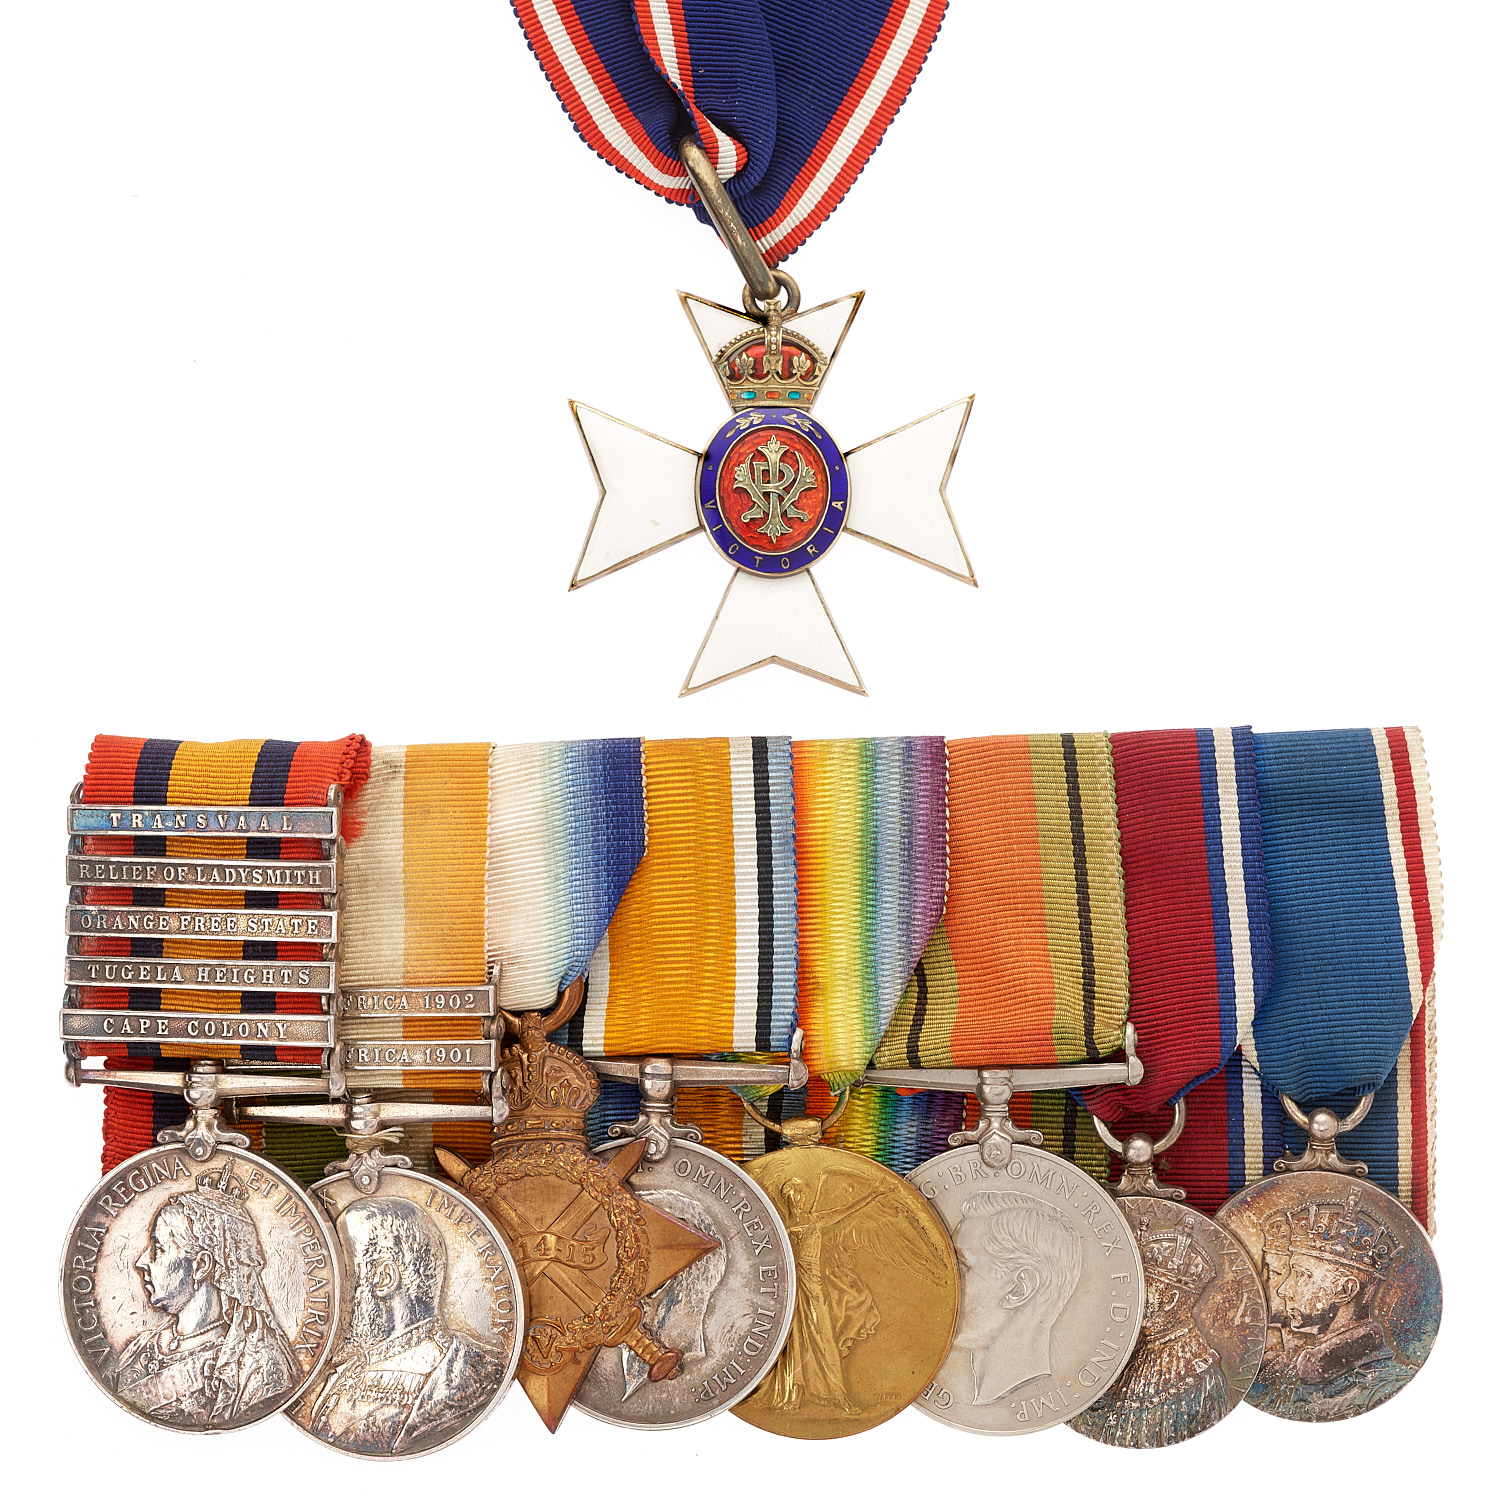 Royal Fusiliers Medal Group of Lieutenant-Colonel Sir Edward Boscawen Frederick CVO, 9th Baronet,